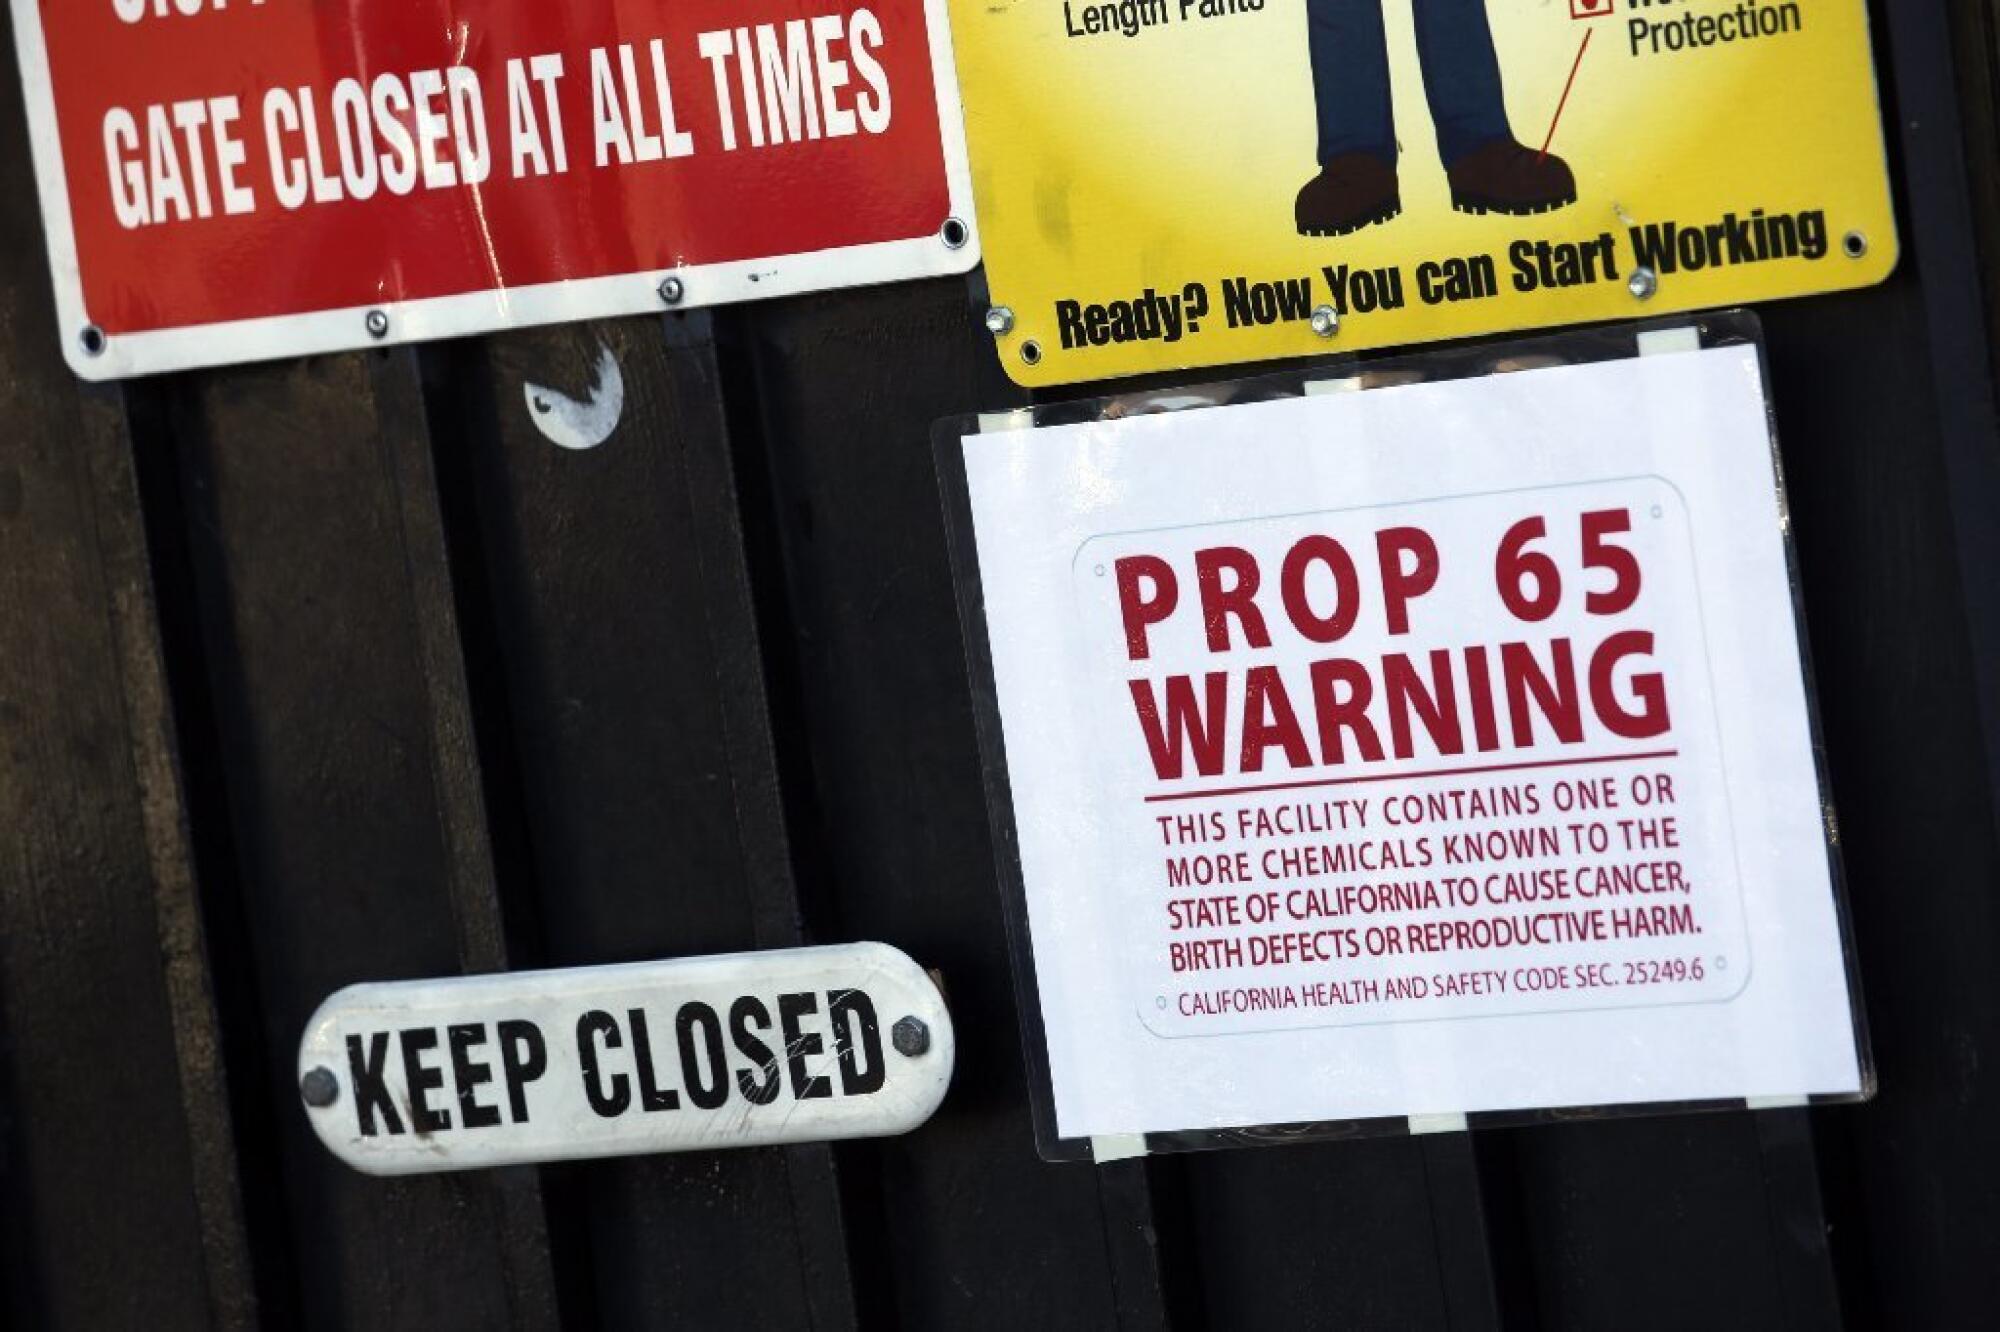 A Proposition 65 notice is one of several warning signs posted on a gate at Aerocraft Heat Treating in Paramount.